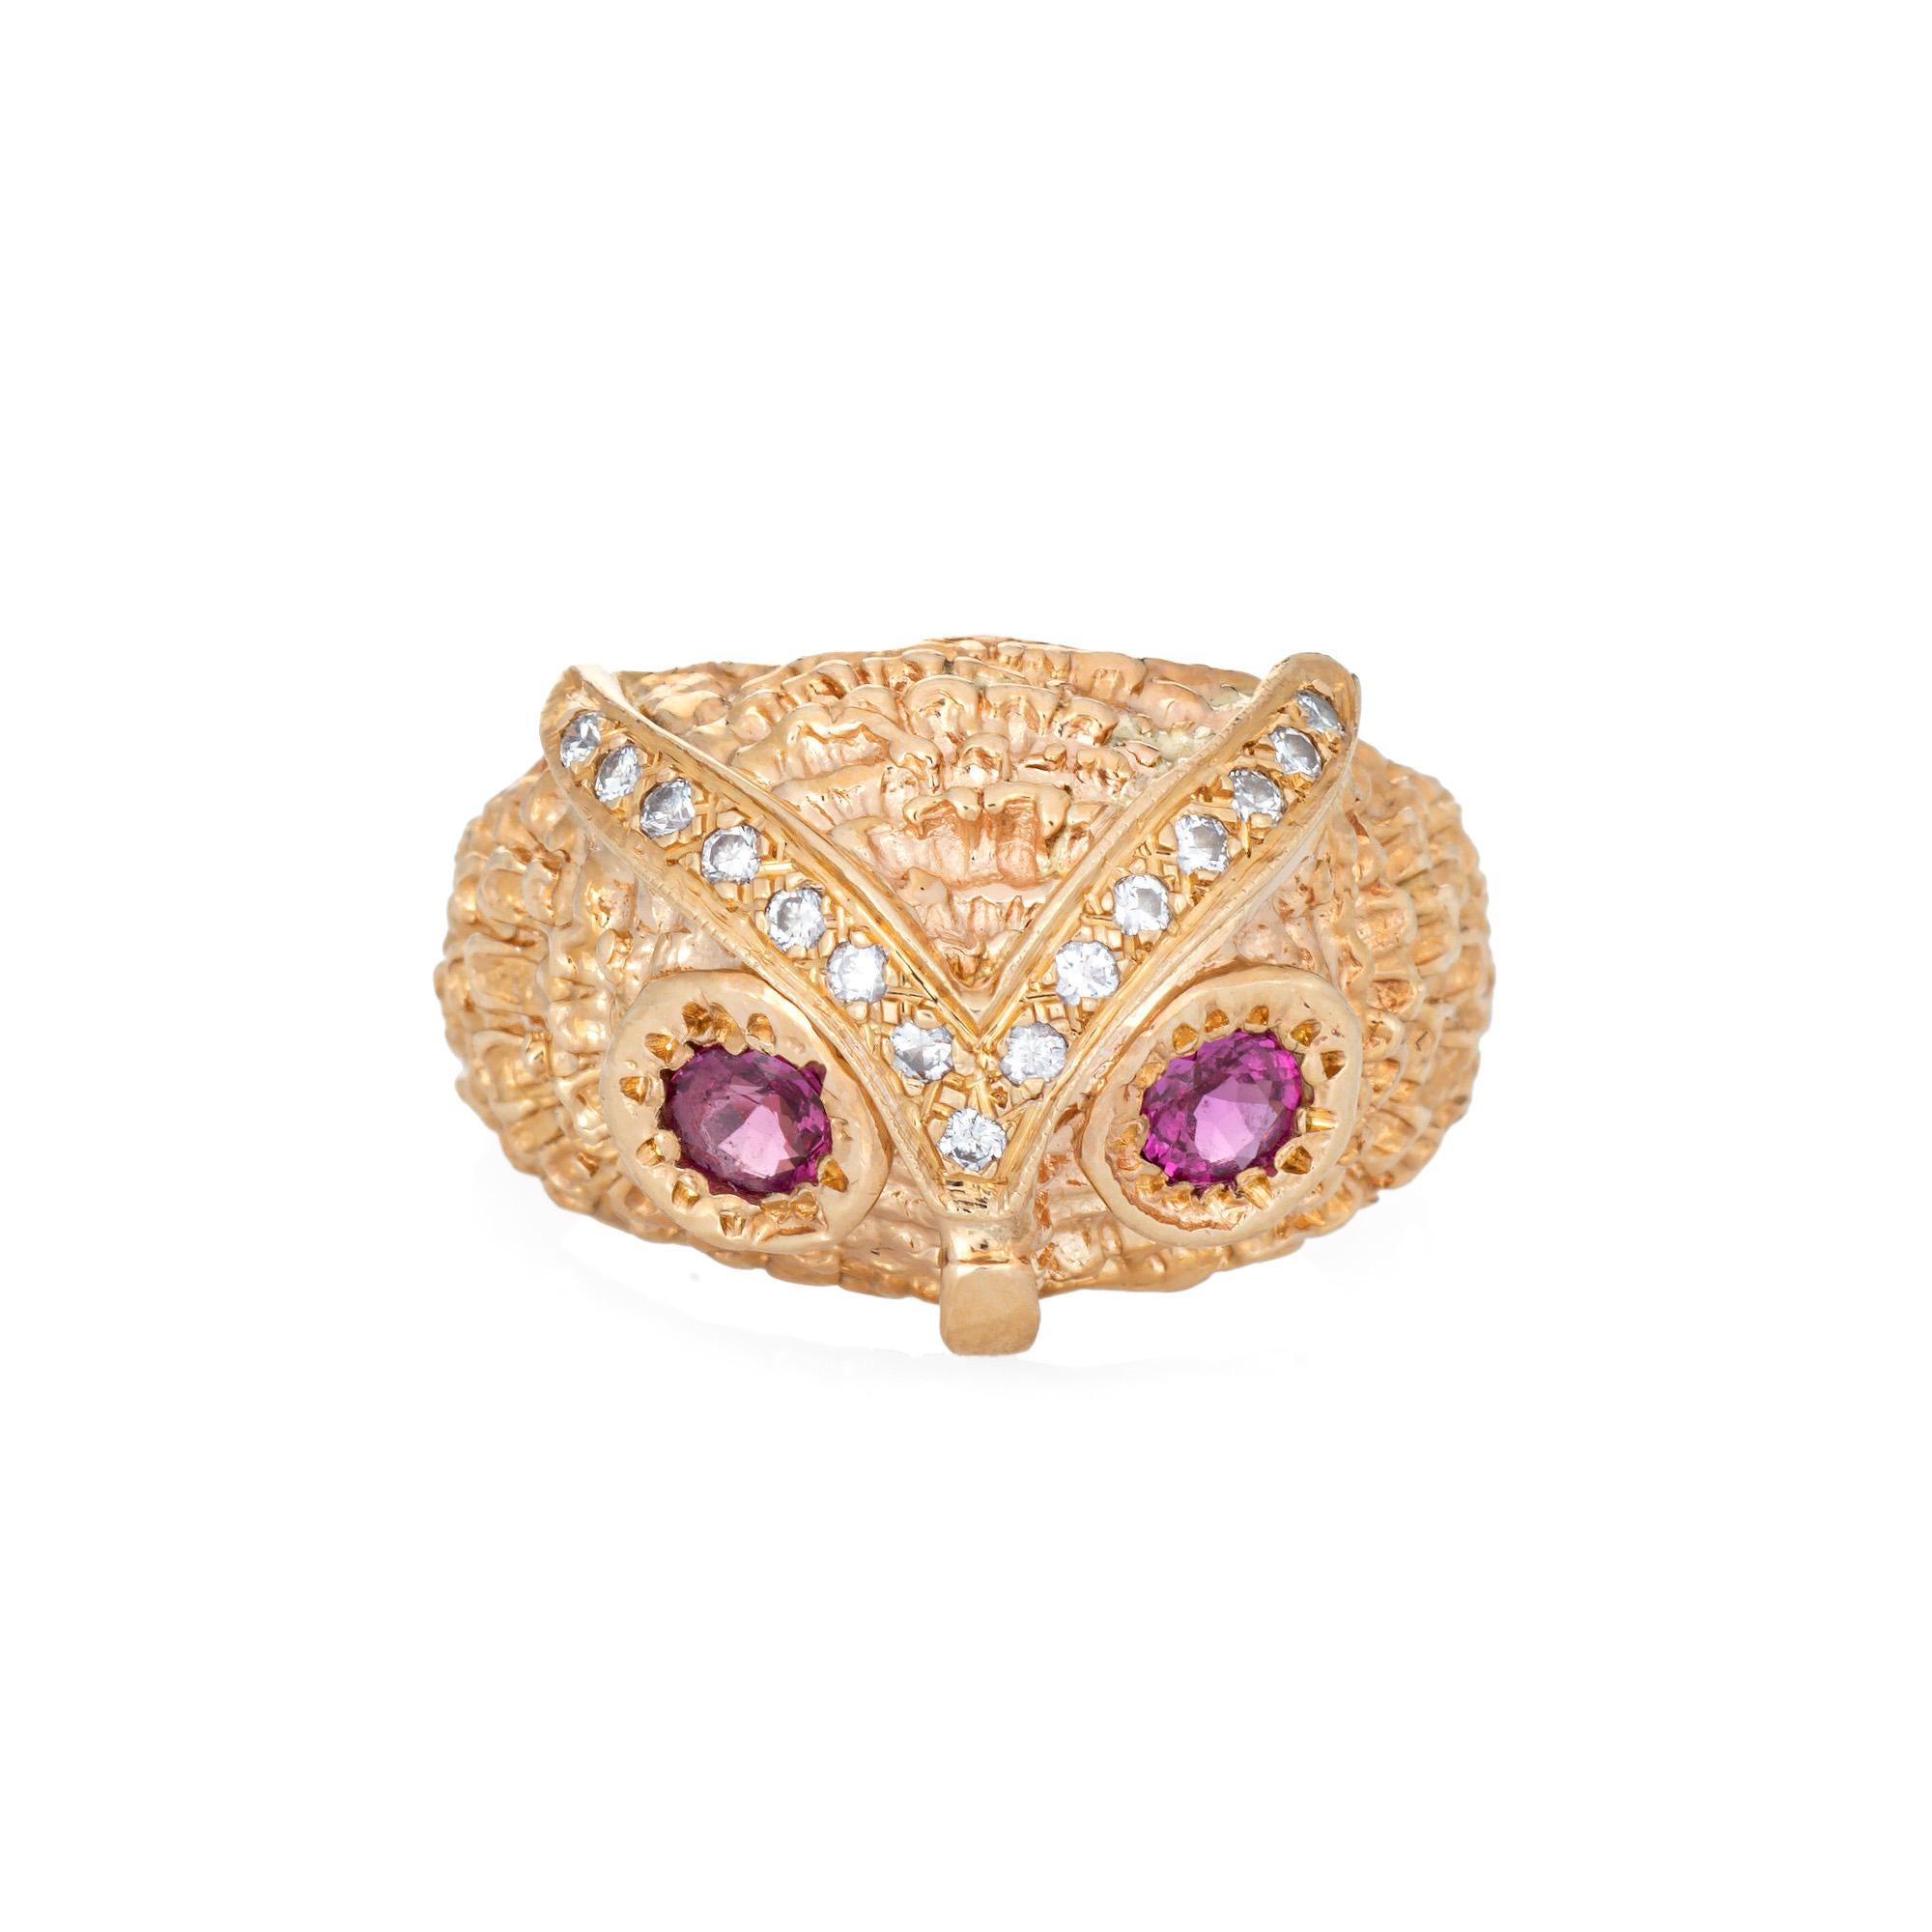 Stylish diamond owl ring set with ruby eyes, crafted in 14 karat yellow gold. 

Diamonds total an estimated 0.08 carats (estimated at H-I color and VS2-I1 clarity). Two rubies measure approx. 3mm. The rubies are in very good condition and free of